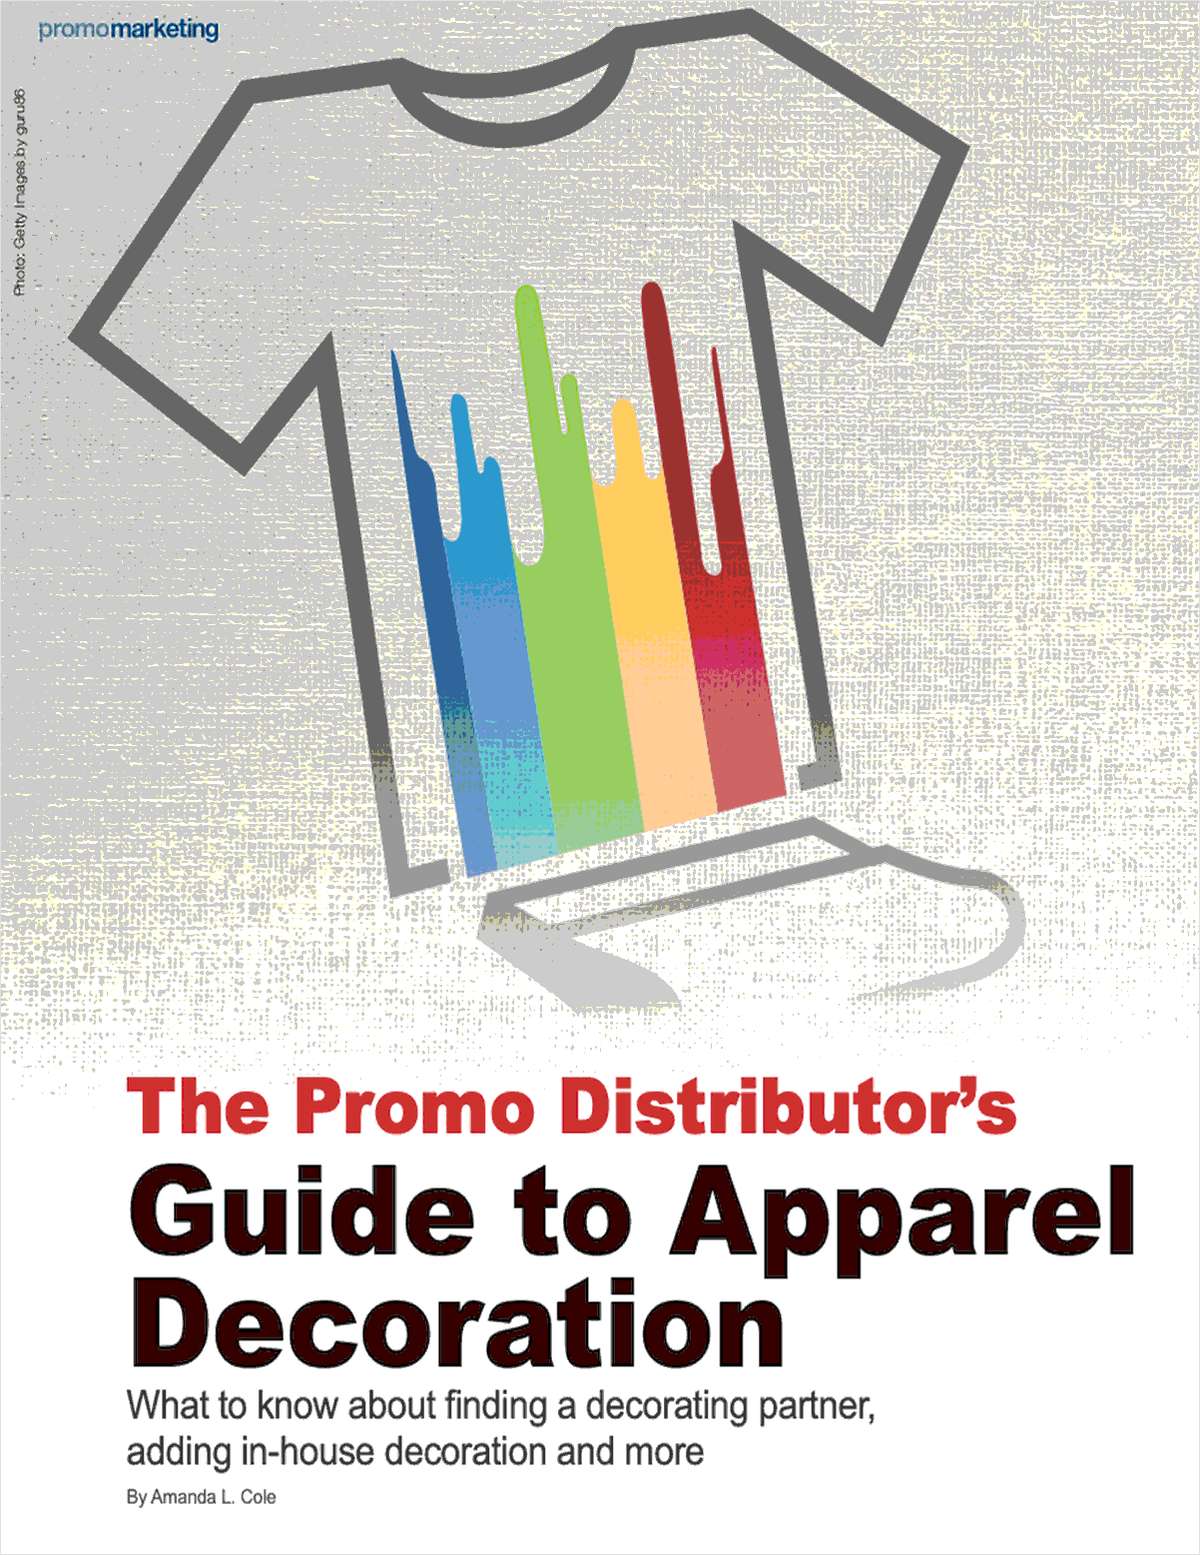 The Promo Distributor's Guide to Apparel Decoration